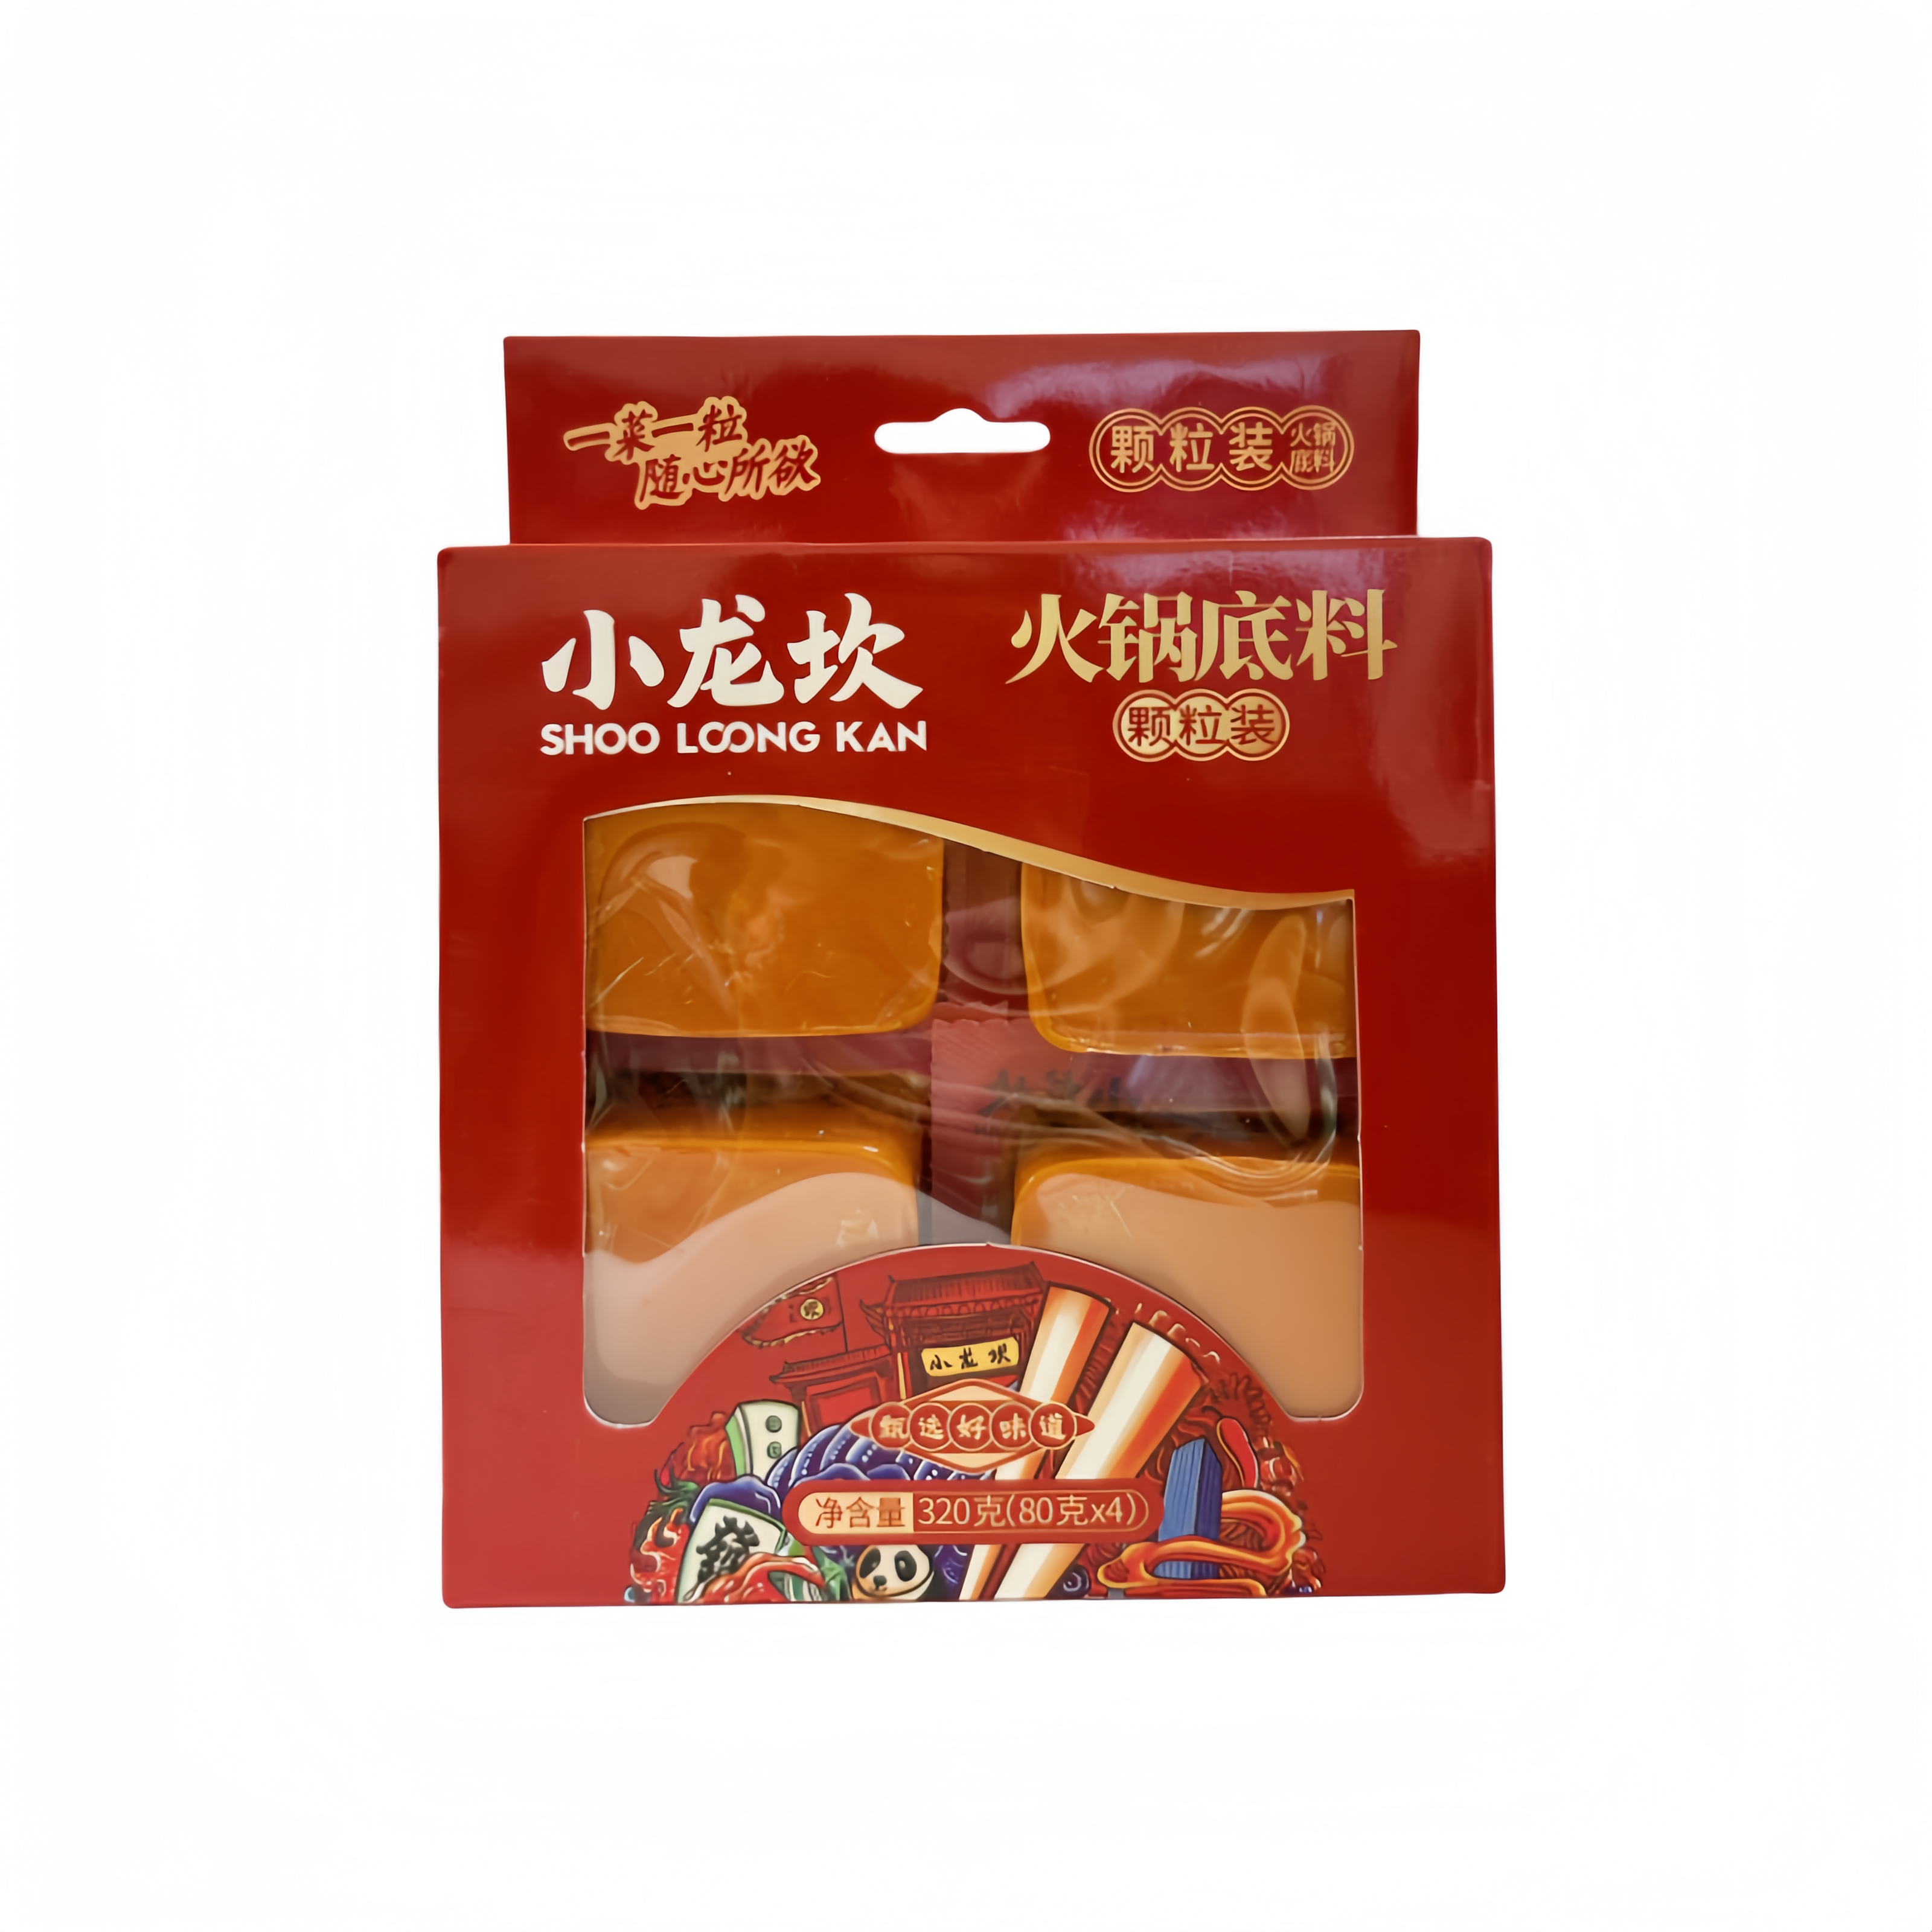 Hotpot Spice With Butter 4-Mini 320g Xiao Long Can China